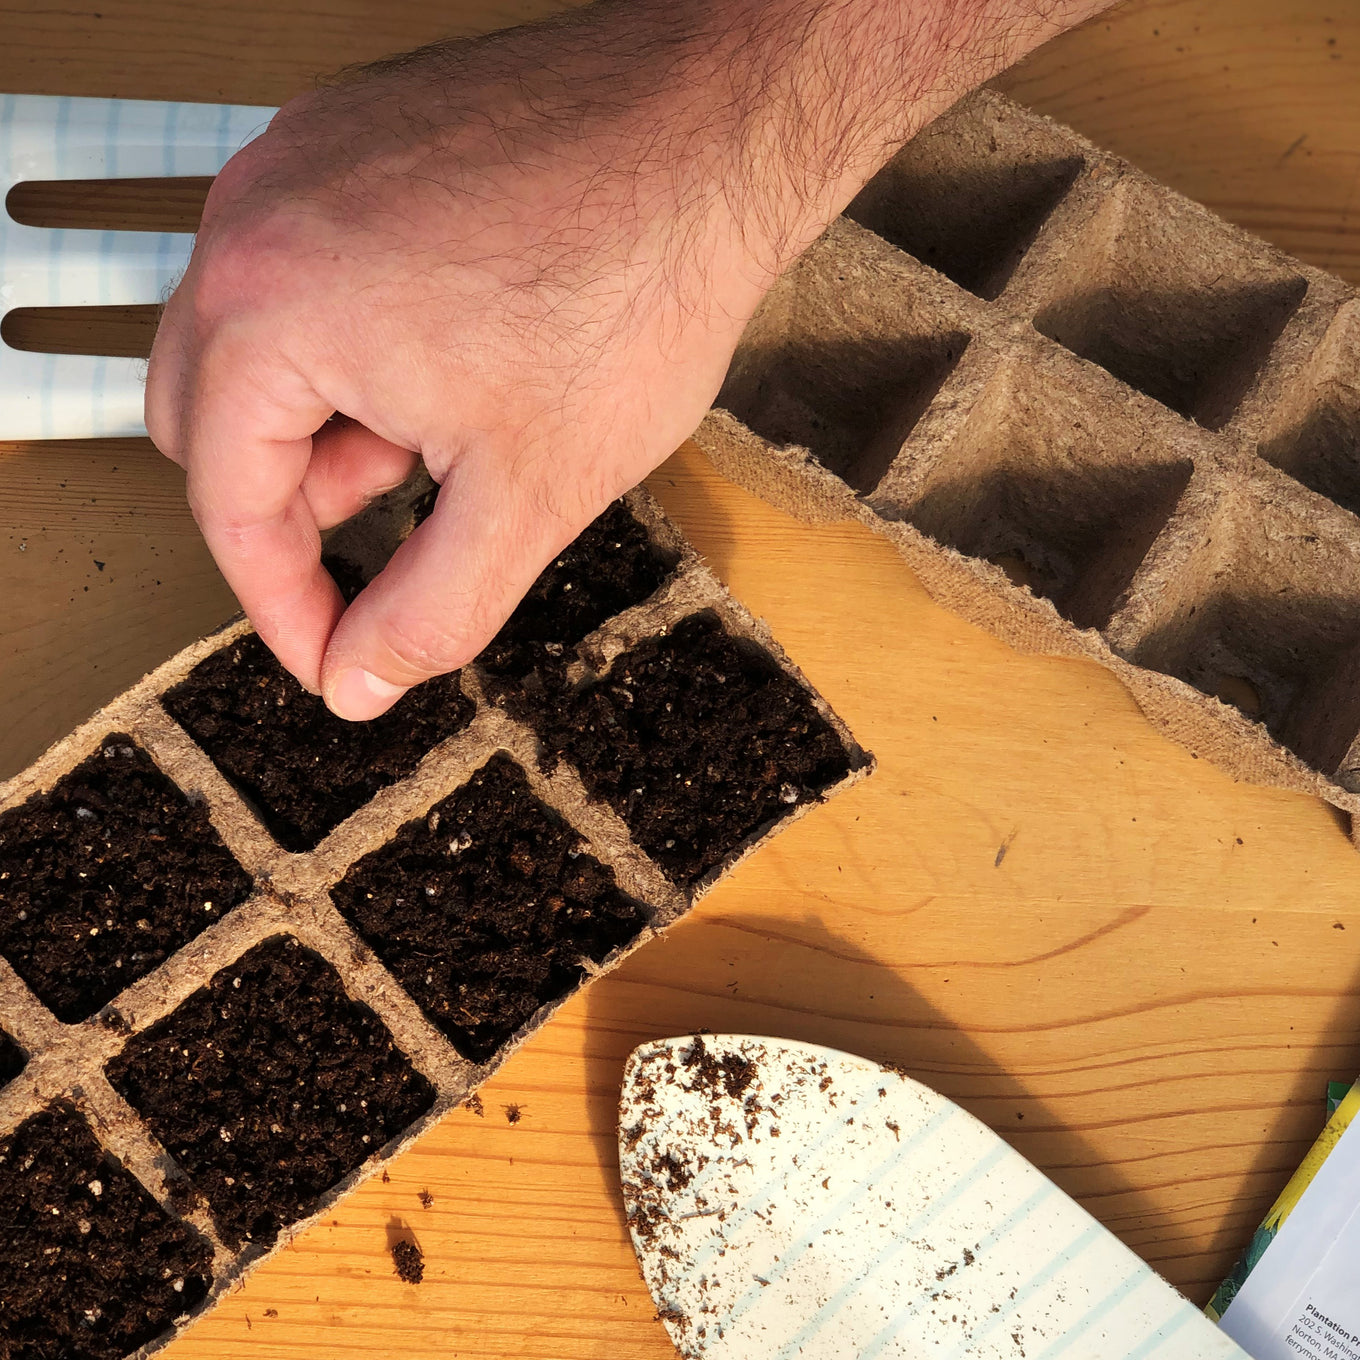 Starting Dwarf Blue Curled Kale Seeds in Jiffy biodegradable peat strip trays which tear apart easily when you're ready to plant your kale outdoors or into a container.